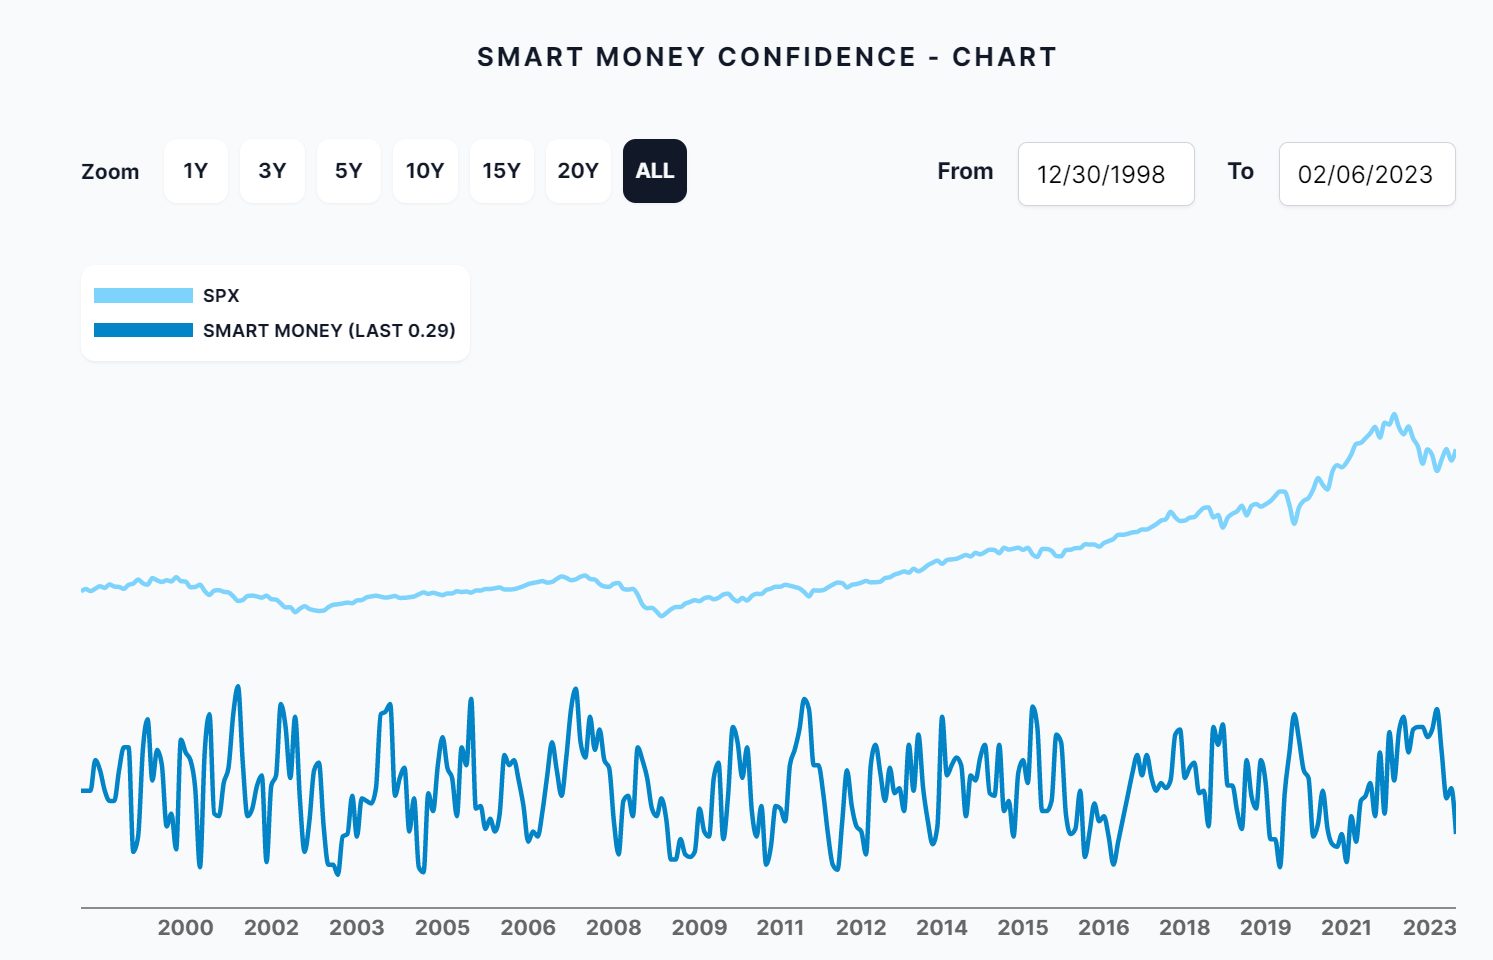 Sentiment Trader Smart Money Confidence Index - Follow the Smart Money at Extremes